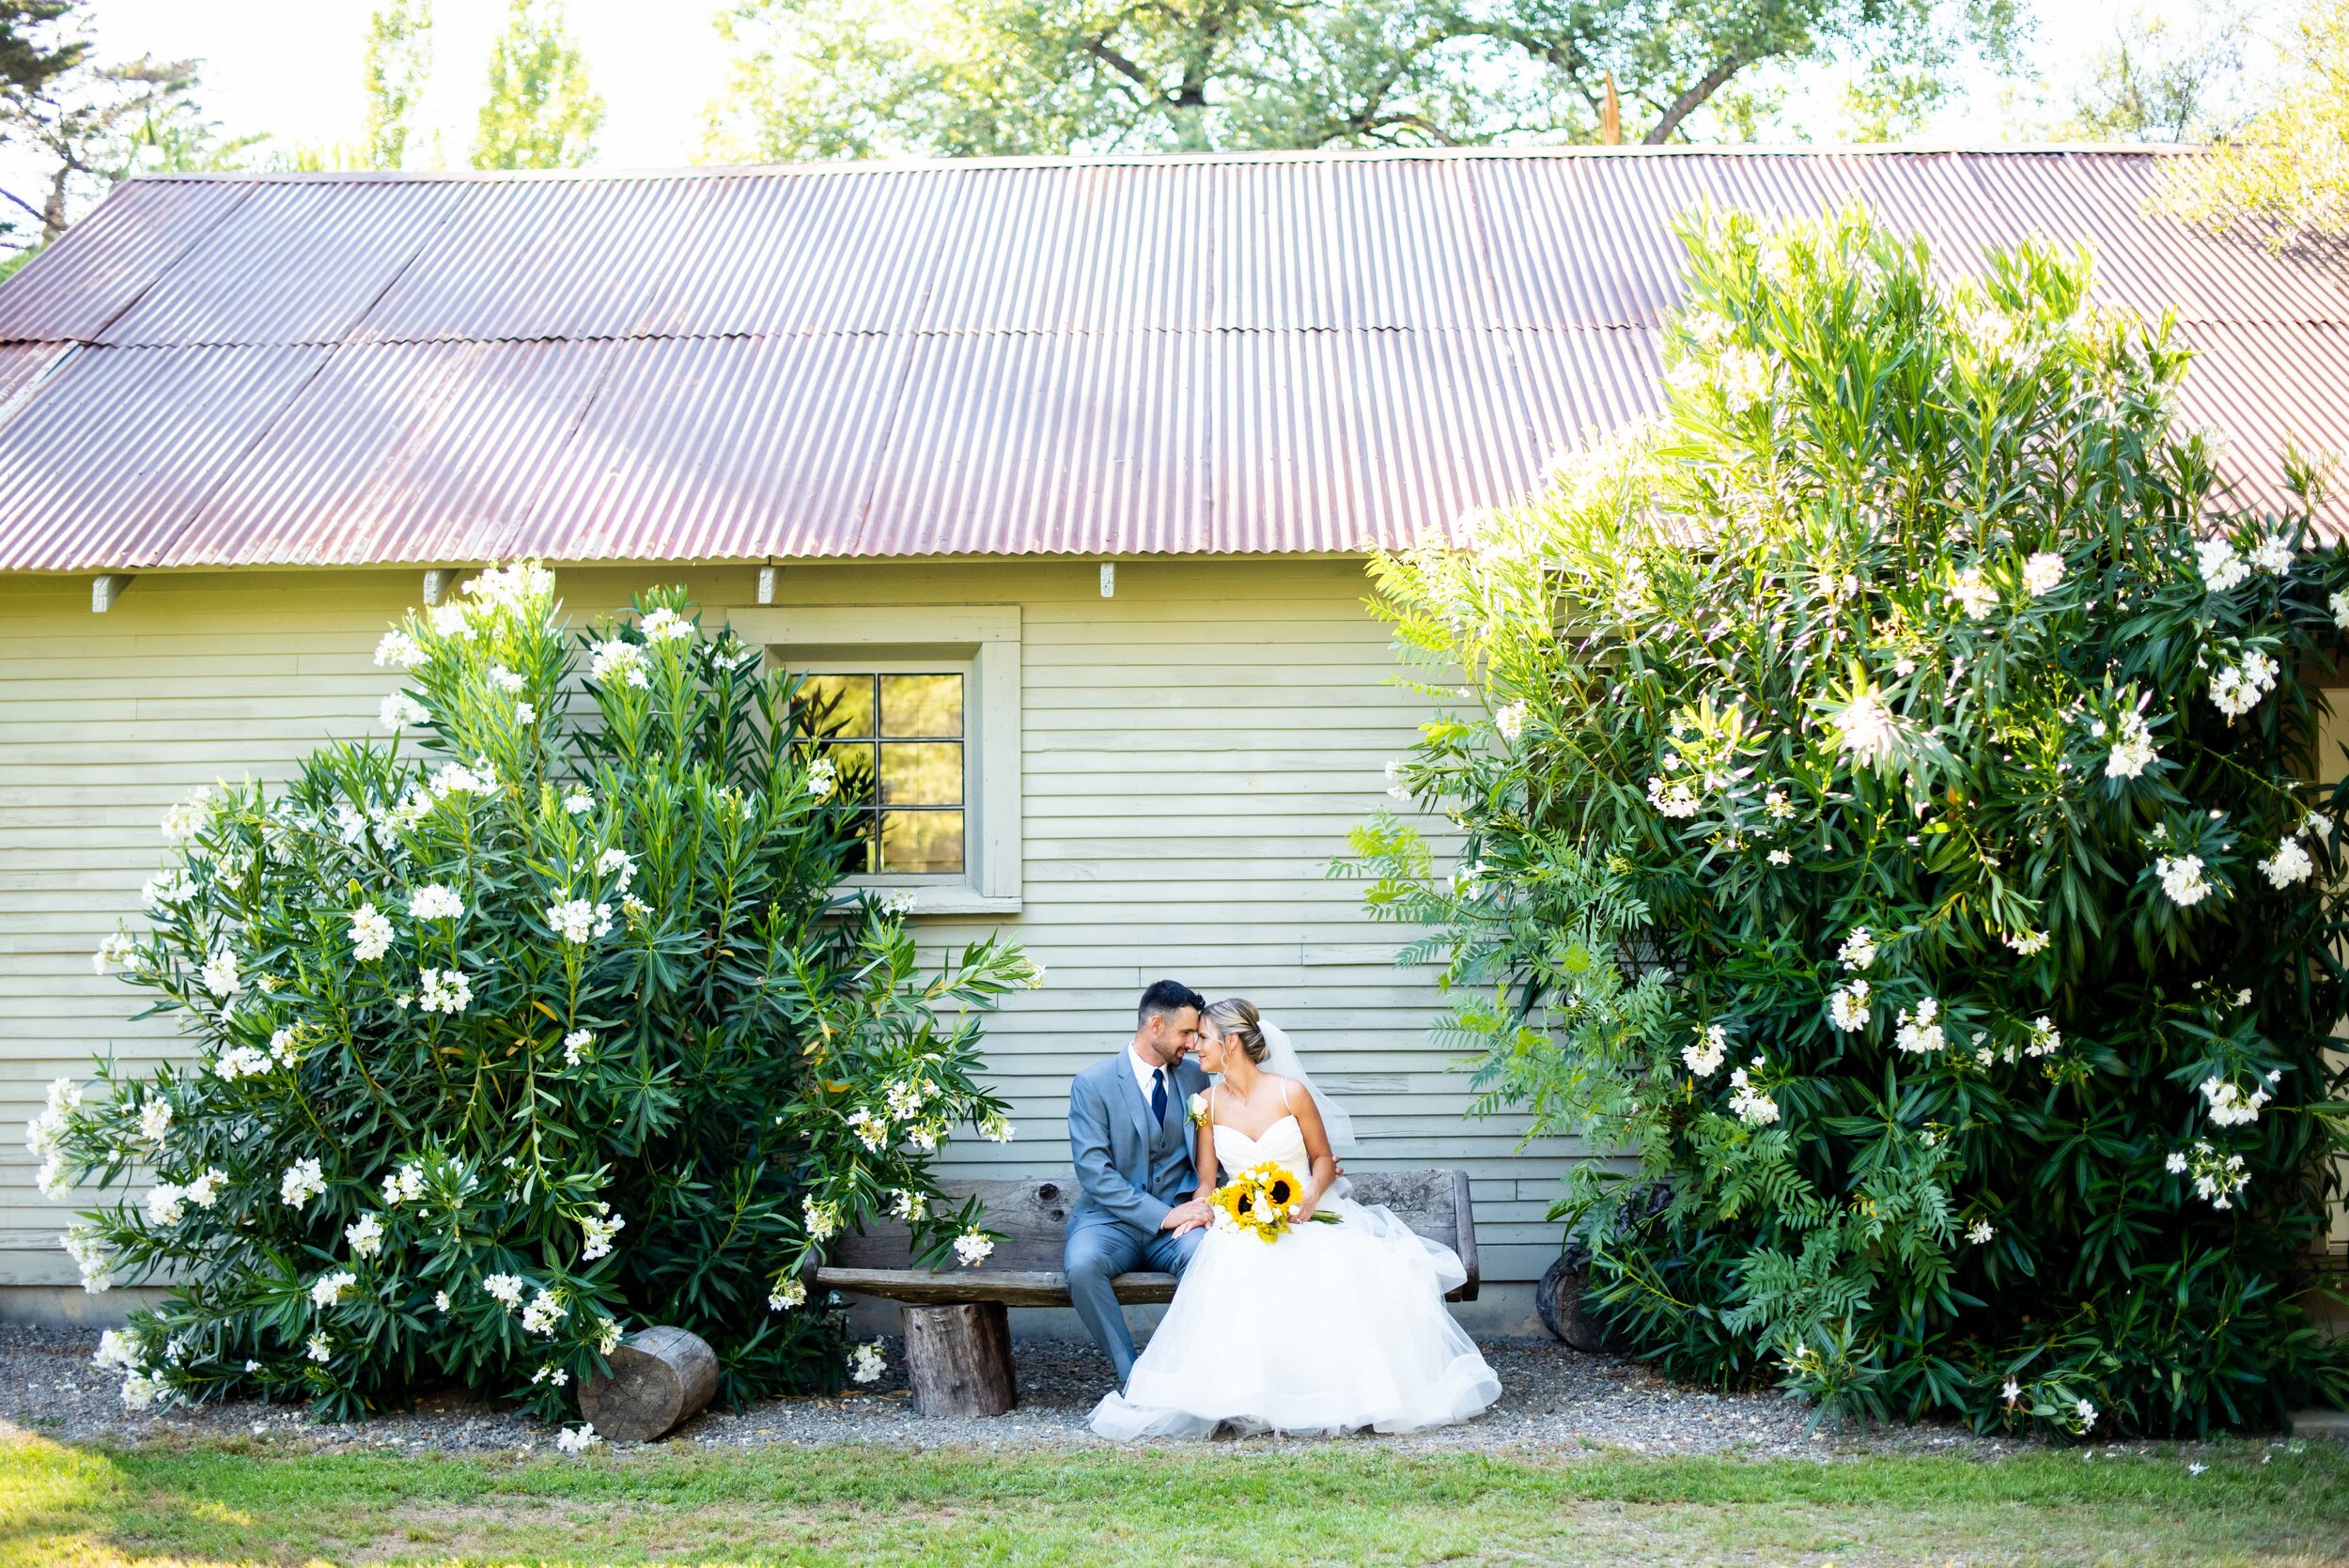 Bride and Groom on bench in front of barn 